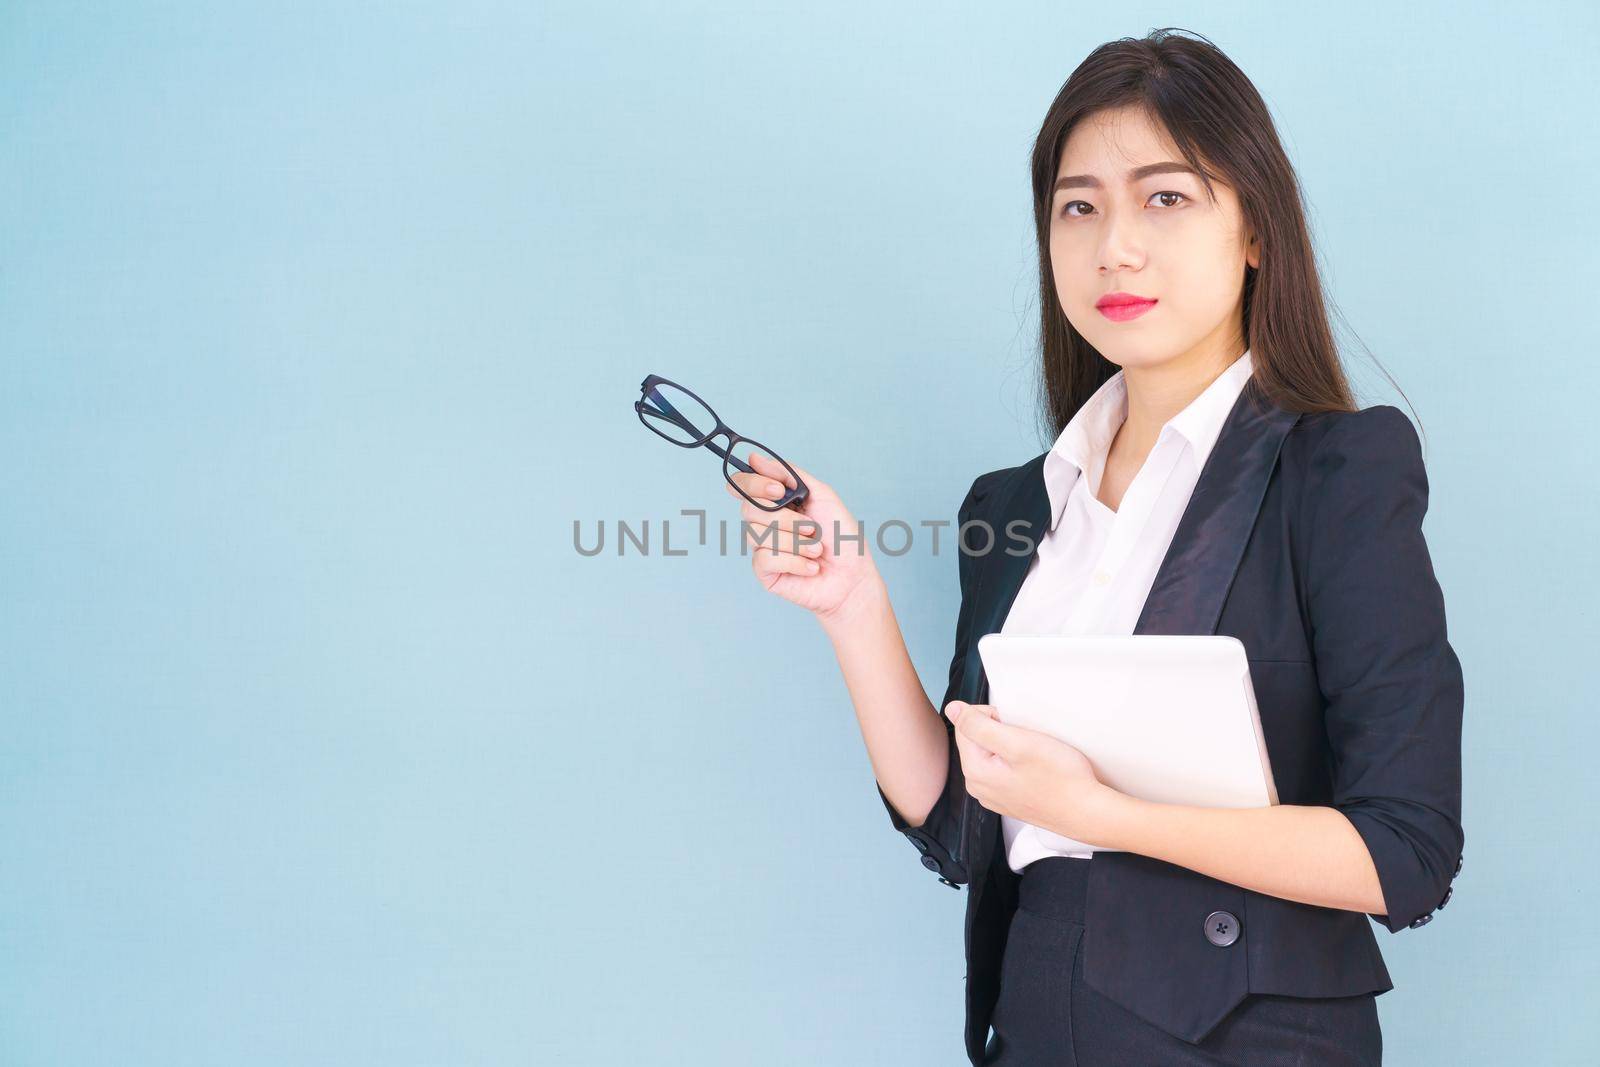 Young Asain women in suit standing using her digital tablet against blue background